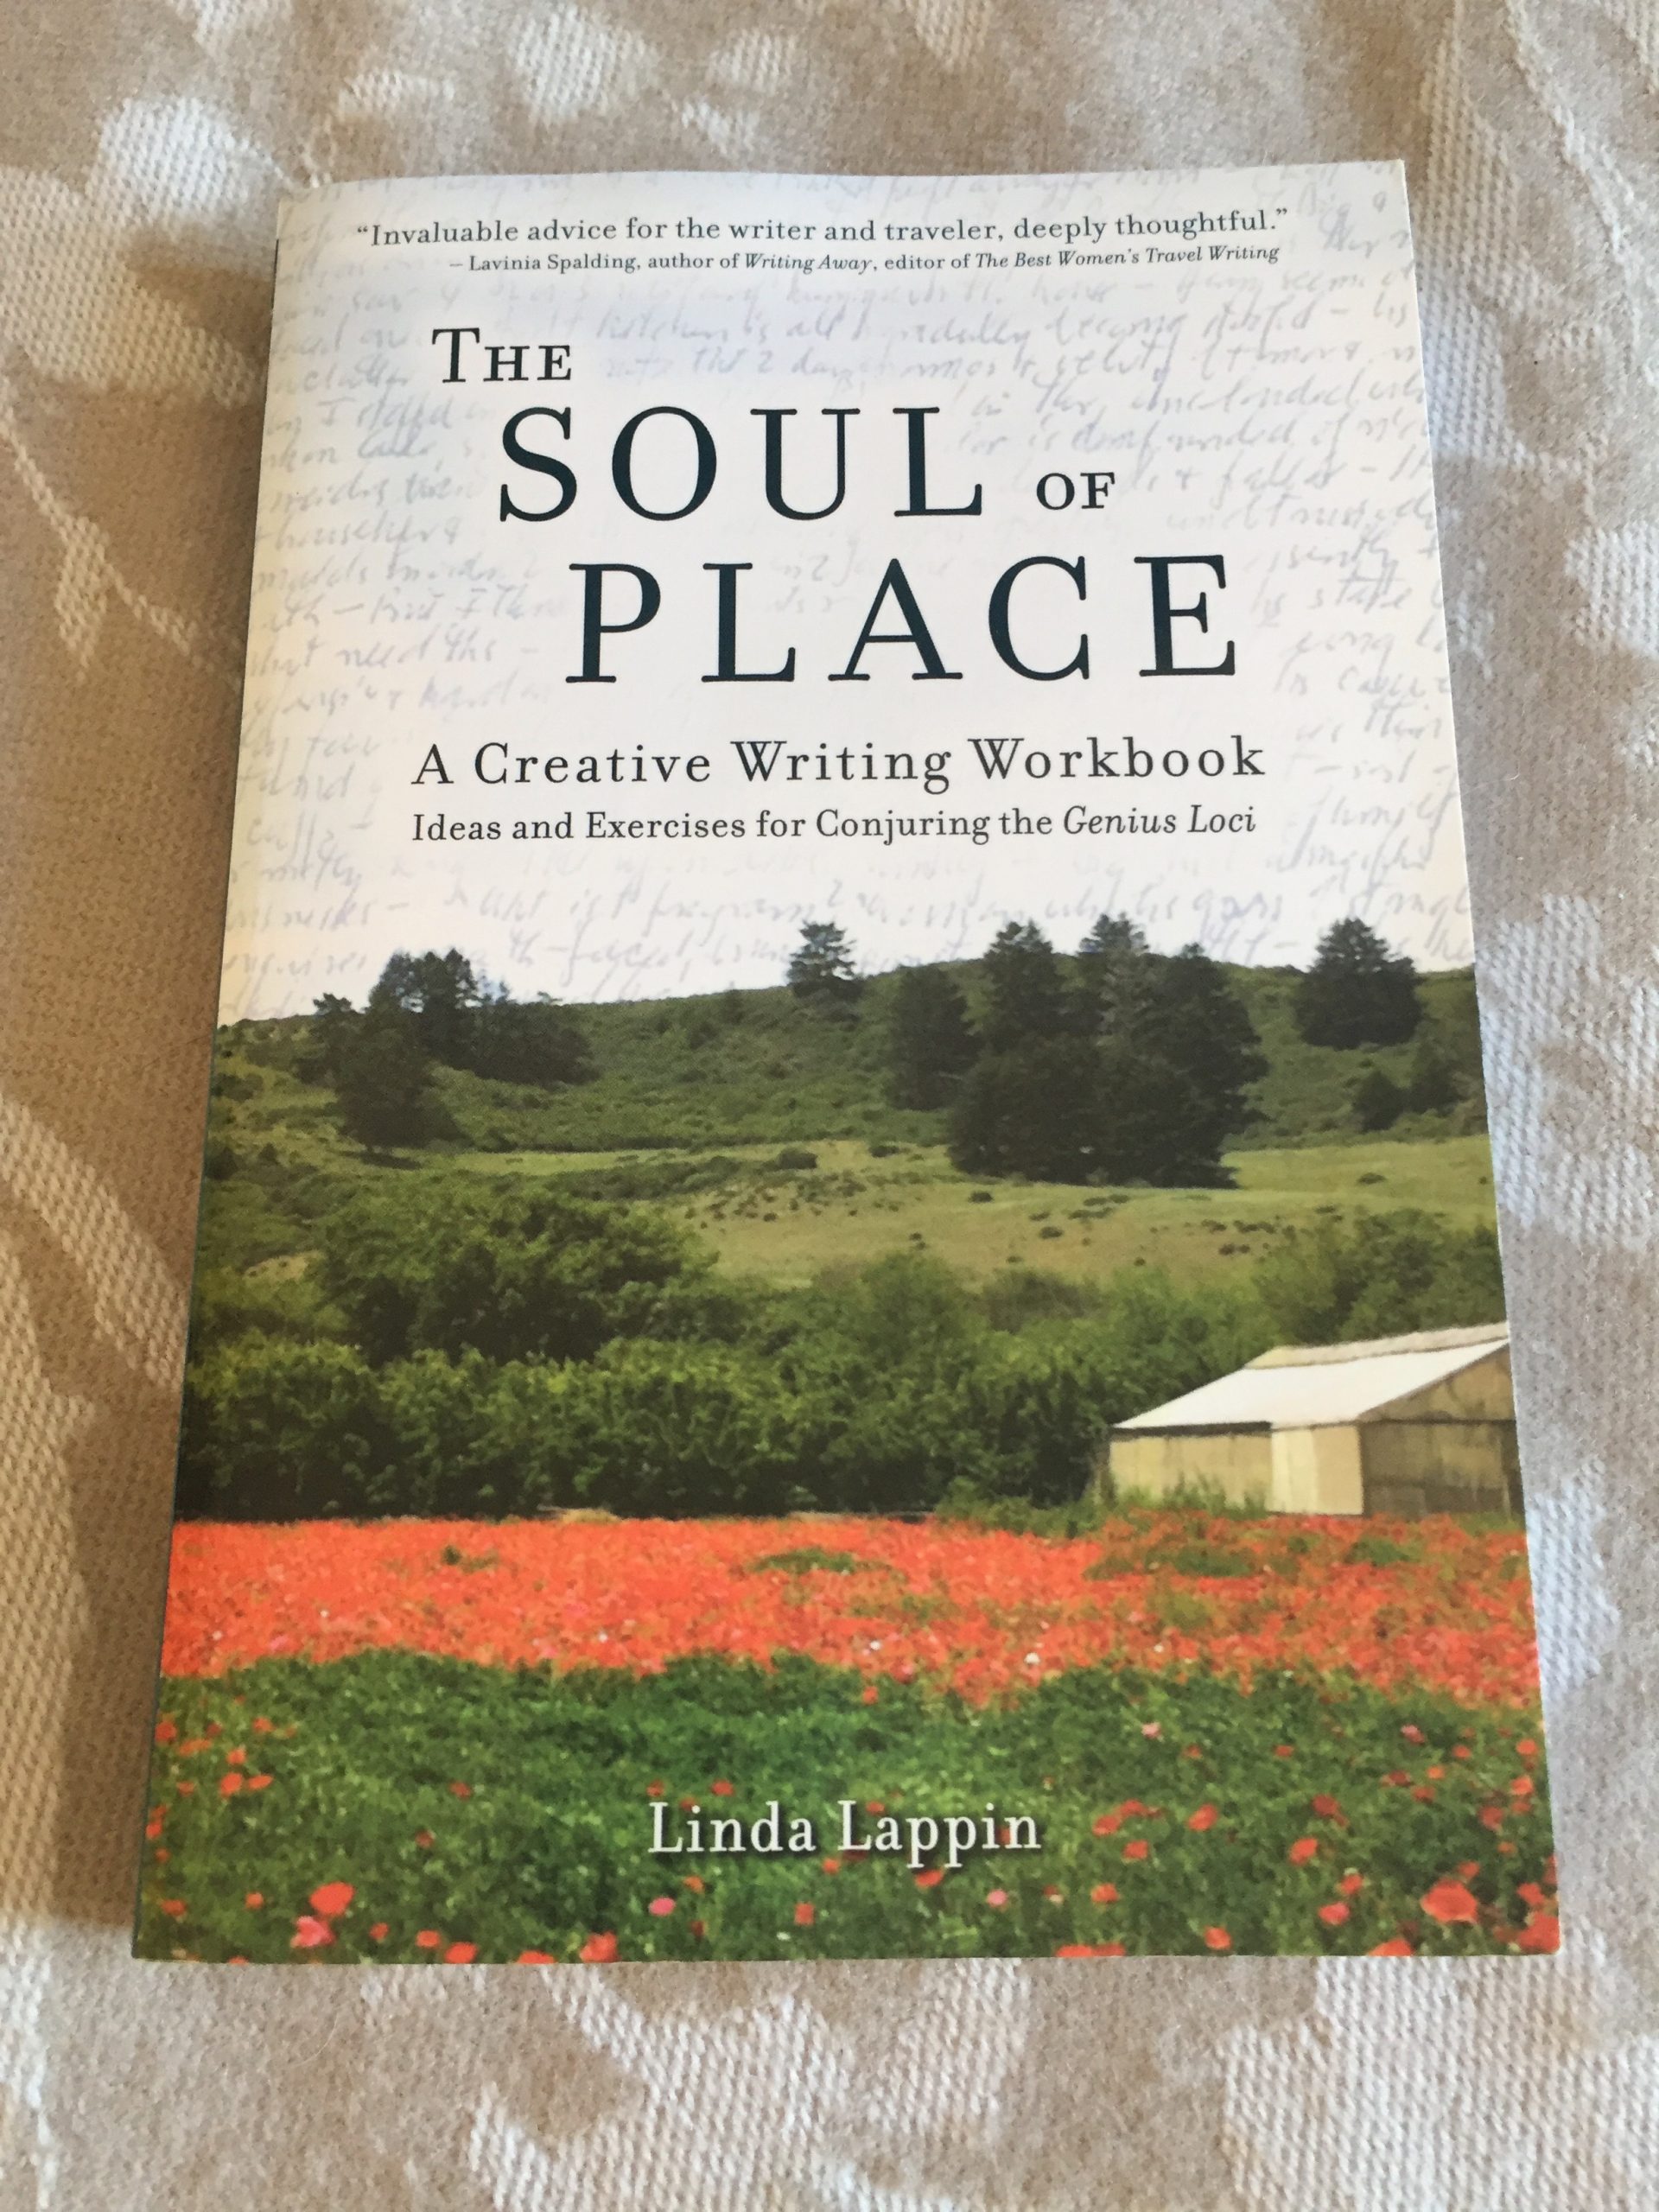 The soul of place